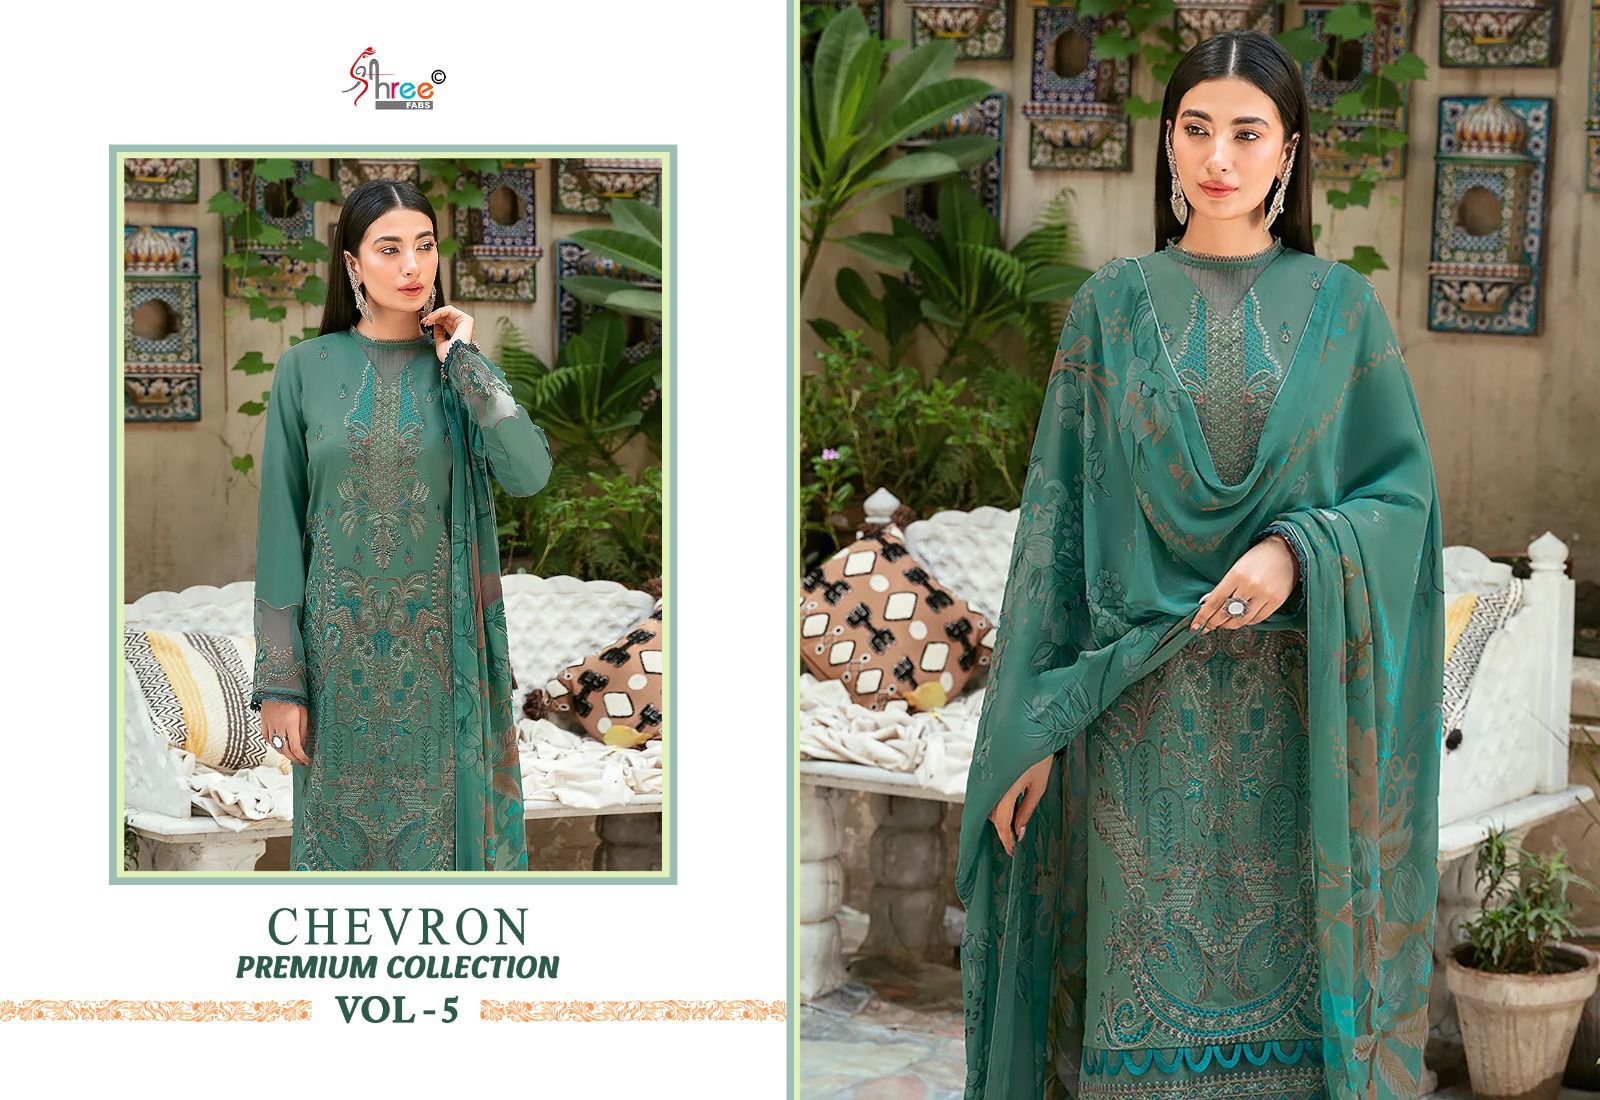 Shree Fabs Chevron Premium Collection Vol 5 Rayon With Embroidery Work Salwar Suits Supplier In Surat